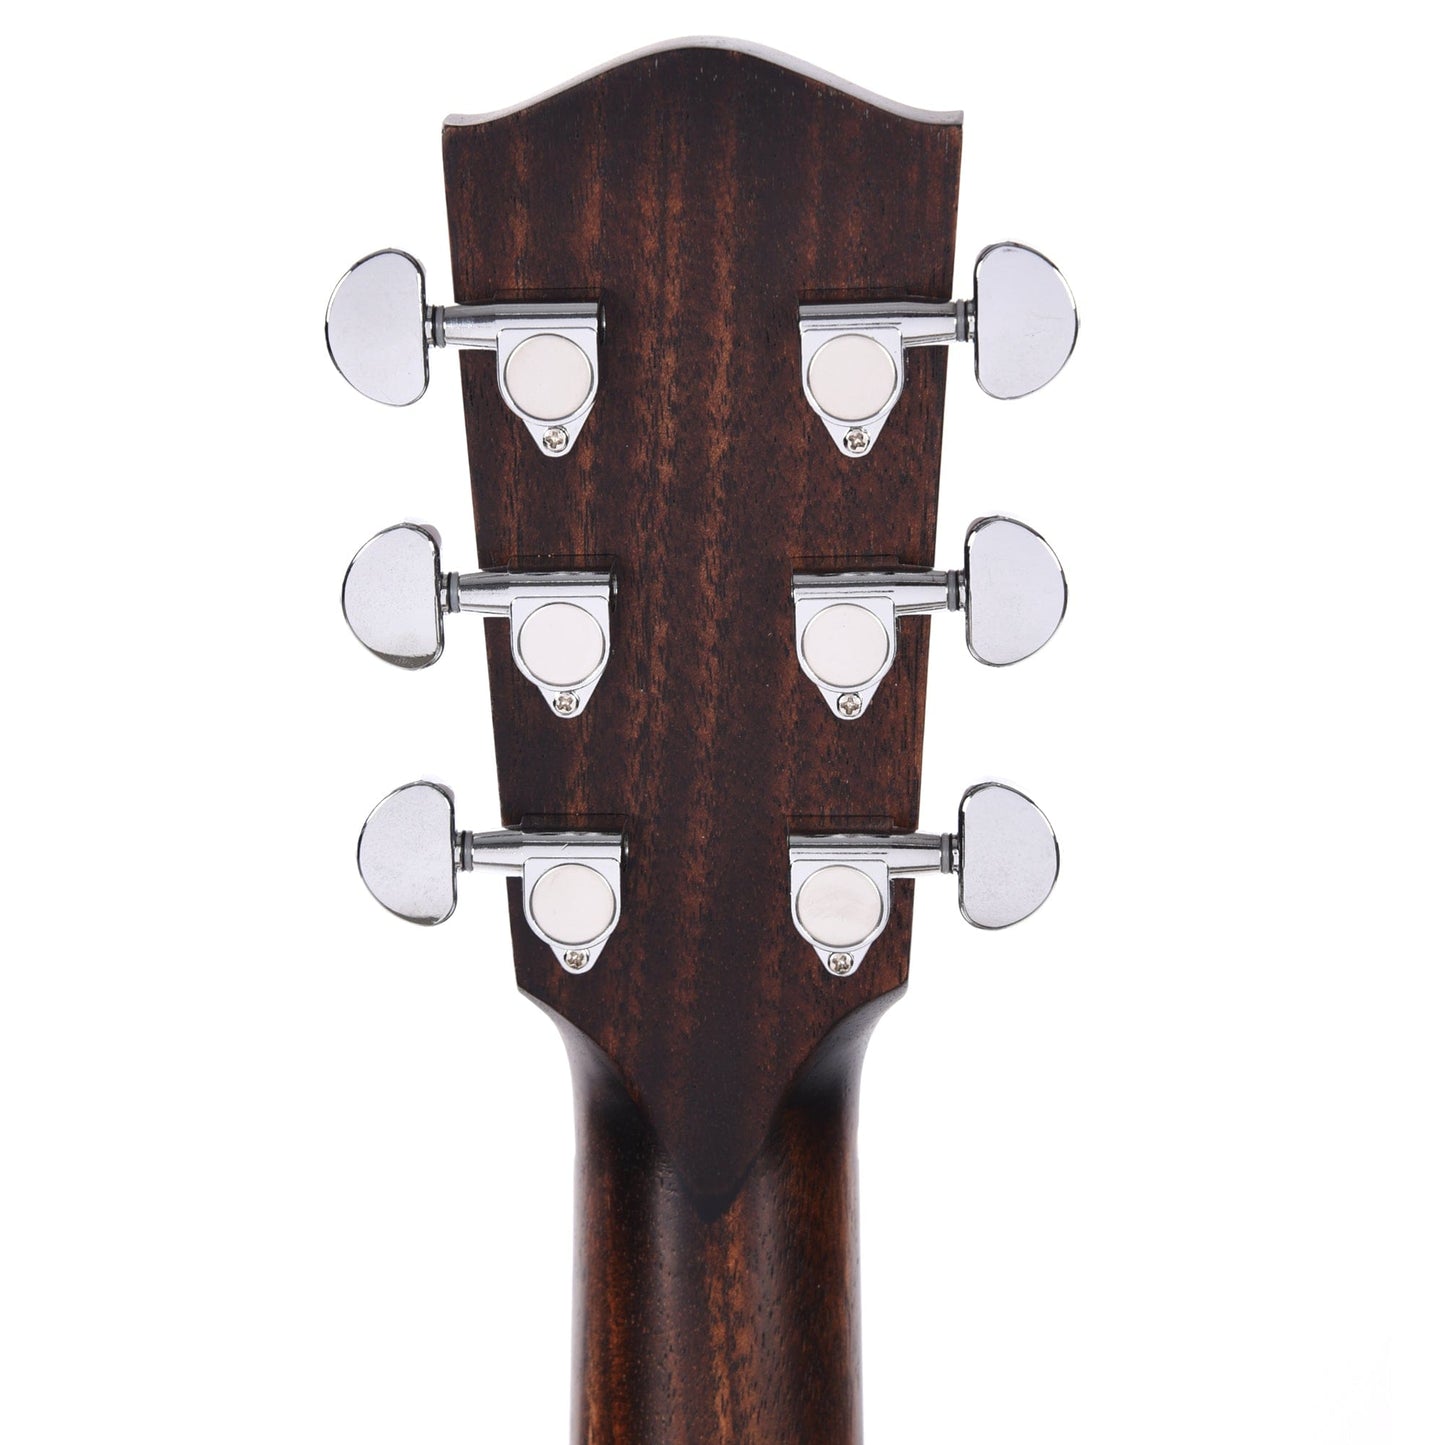 Eastman PCH2-GACE Thermo-Cured Sitka/Rosewood Grand Auditorium Natural Acoustic Guitars / OM and Auditorium